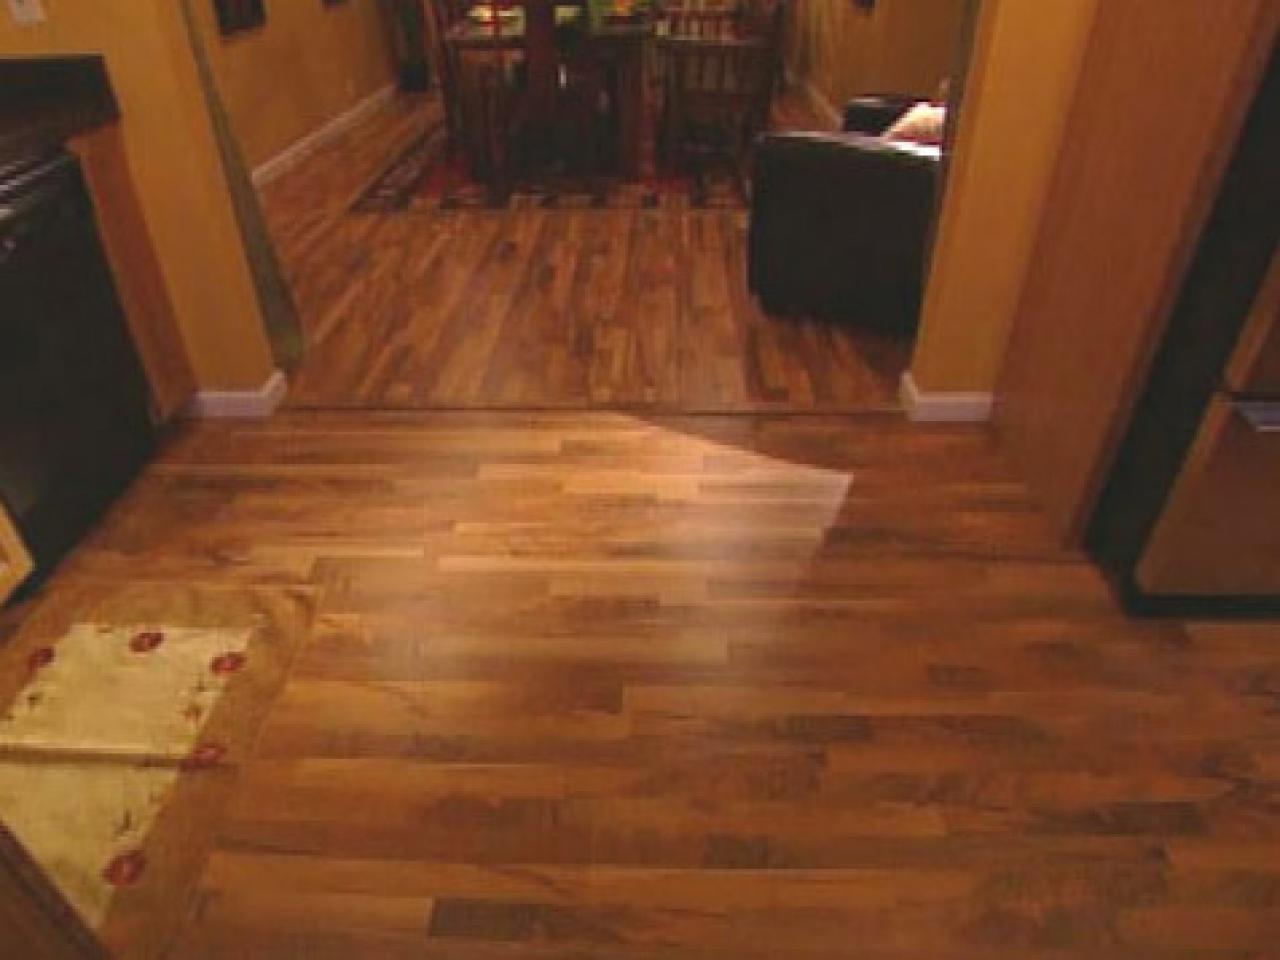 Install Tongue And Groove Wood Veneer, Which Direction To Lay Wood Flooring In Kitchen